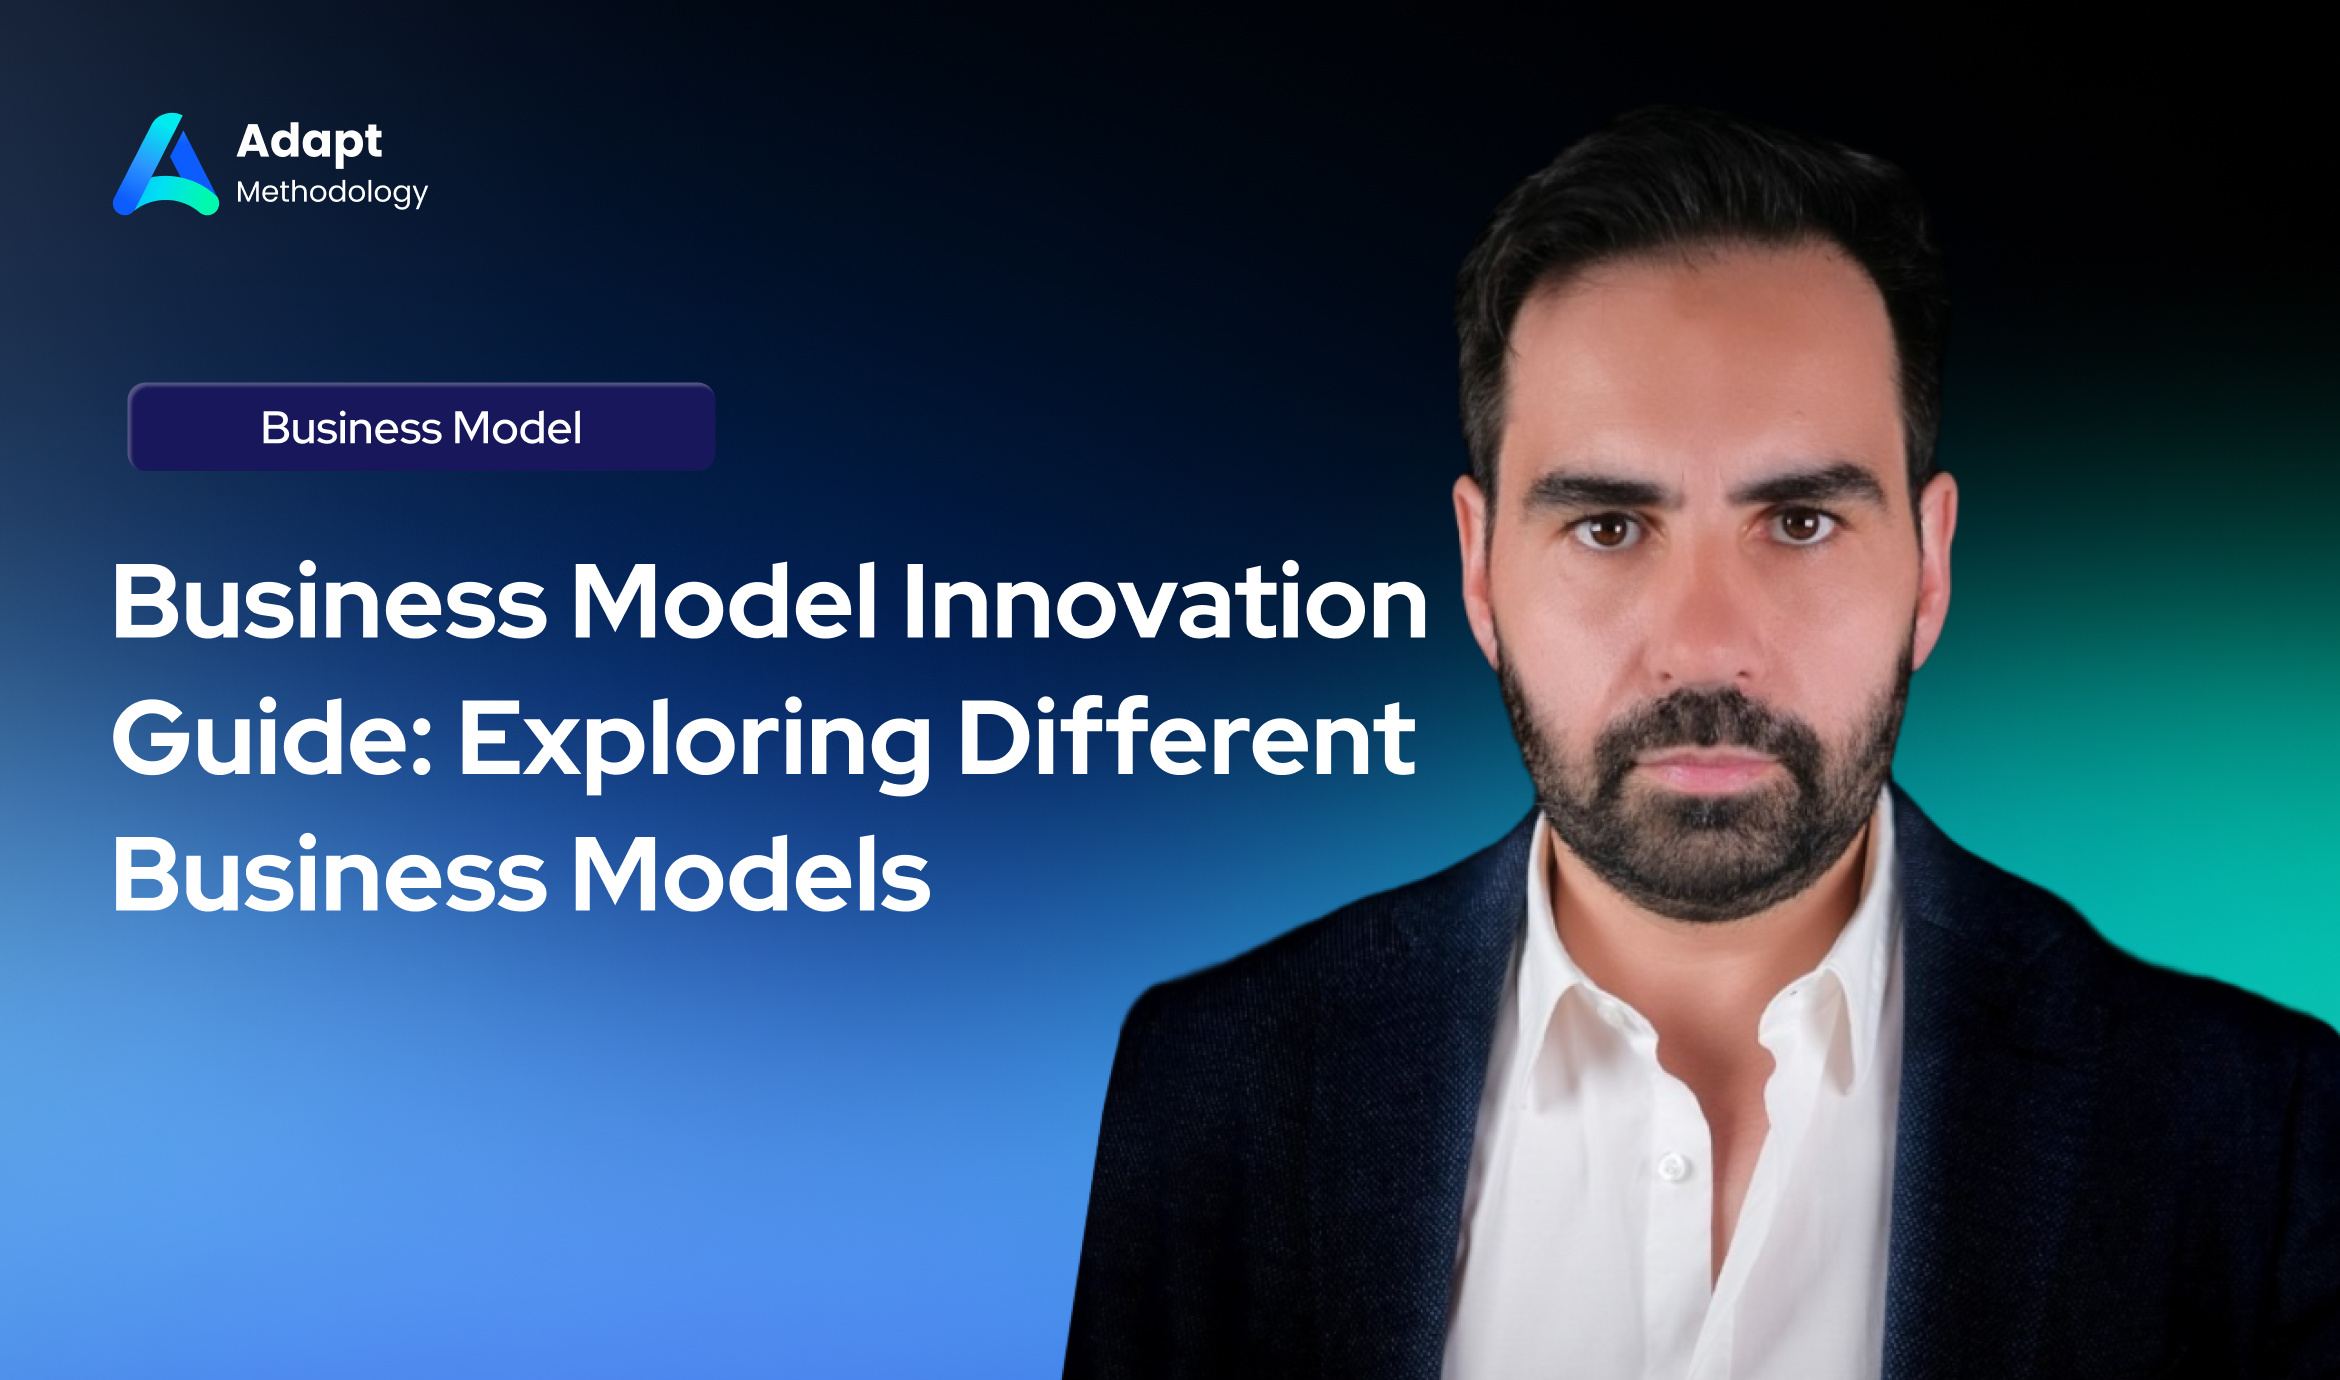 Business Model Innovation Guide - Exploring Different Business Models